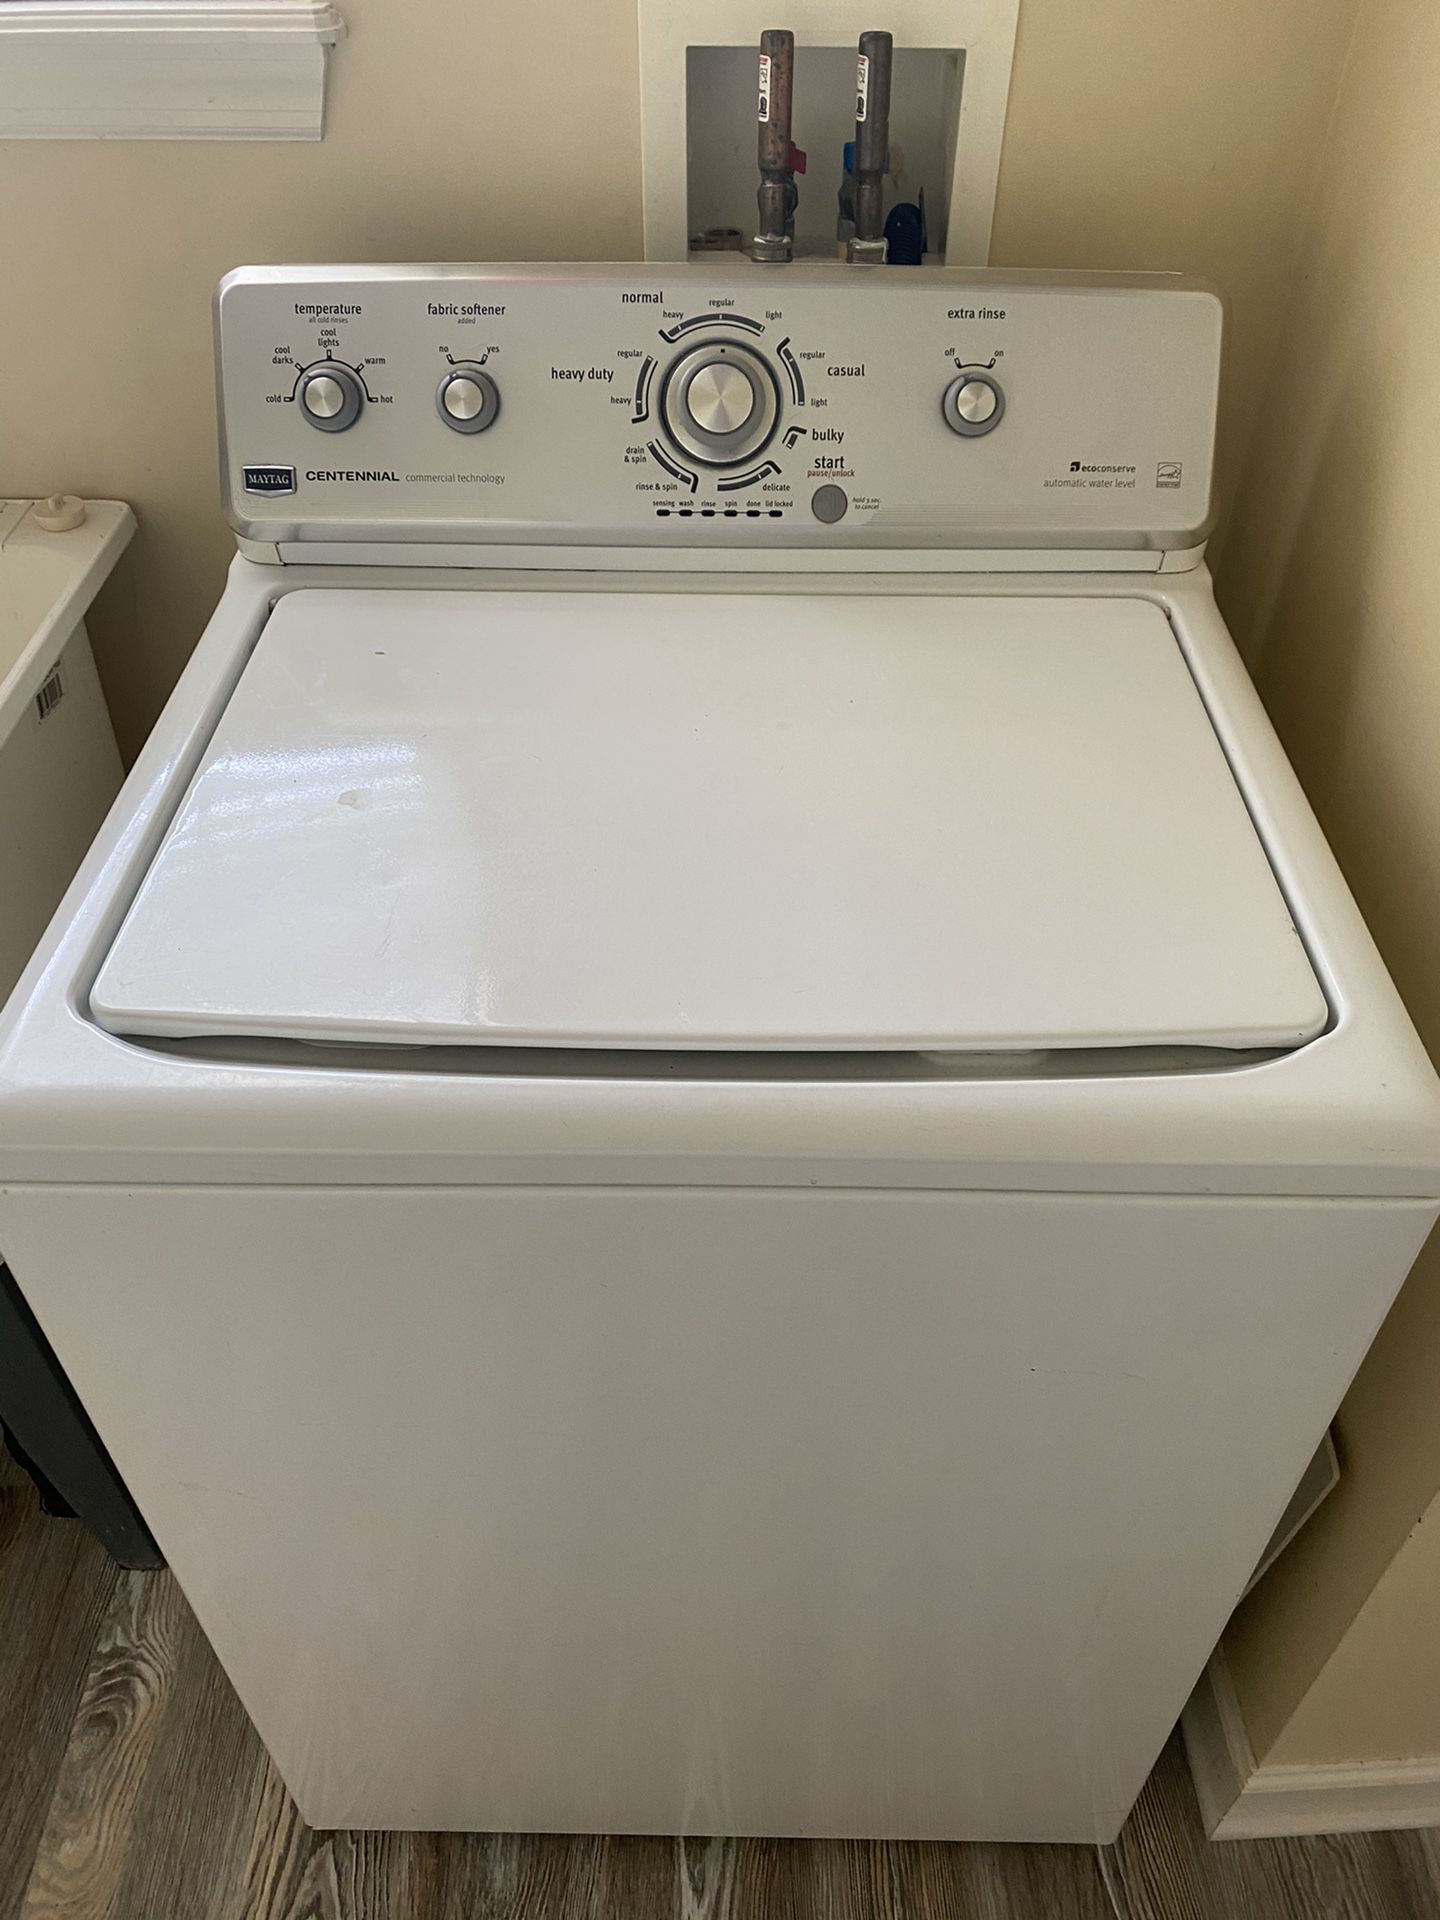 (SALE PENDING) Maytag Centennial Washer and Dryer...HE washer